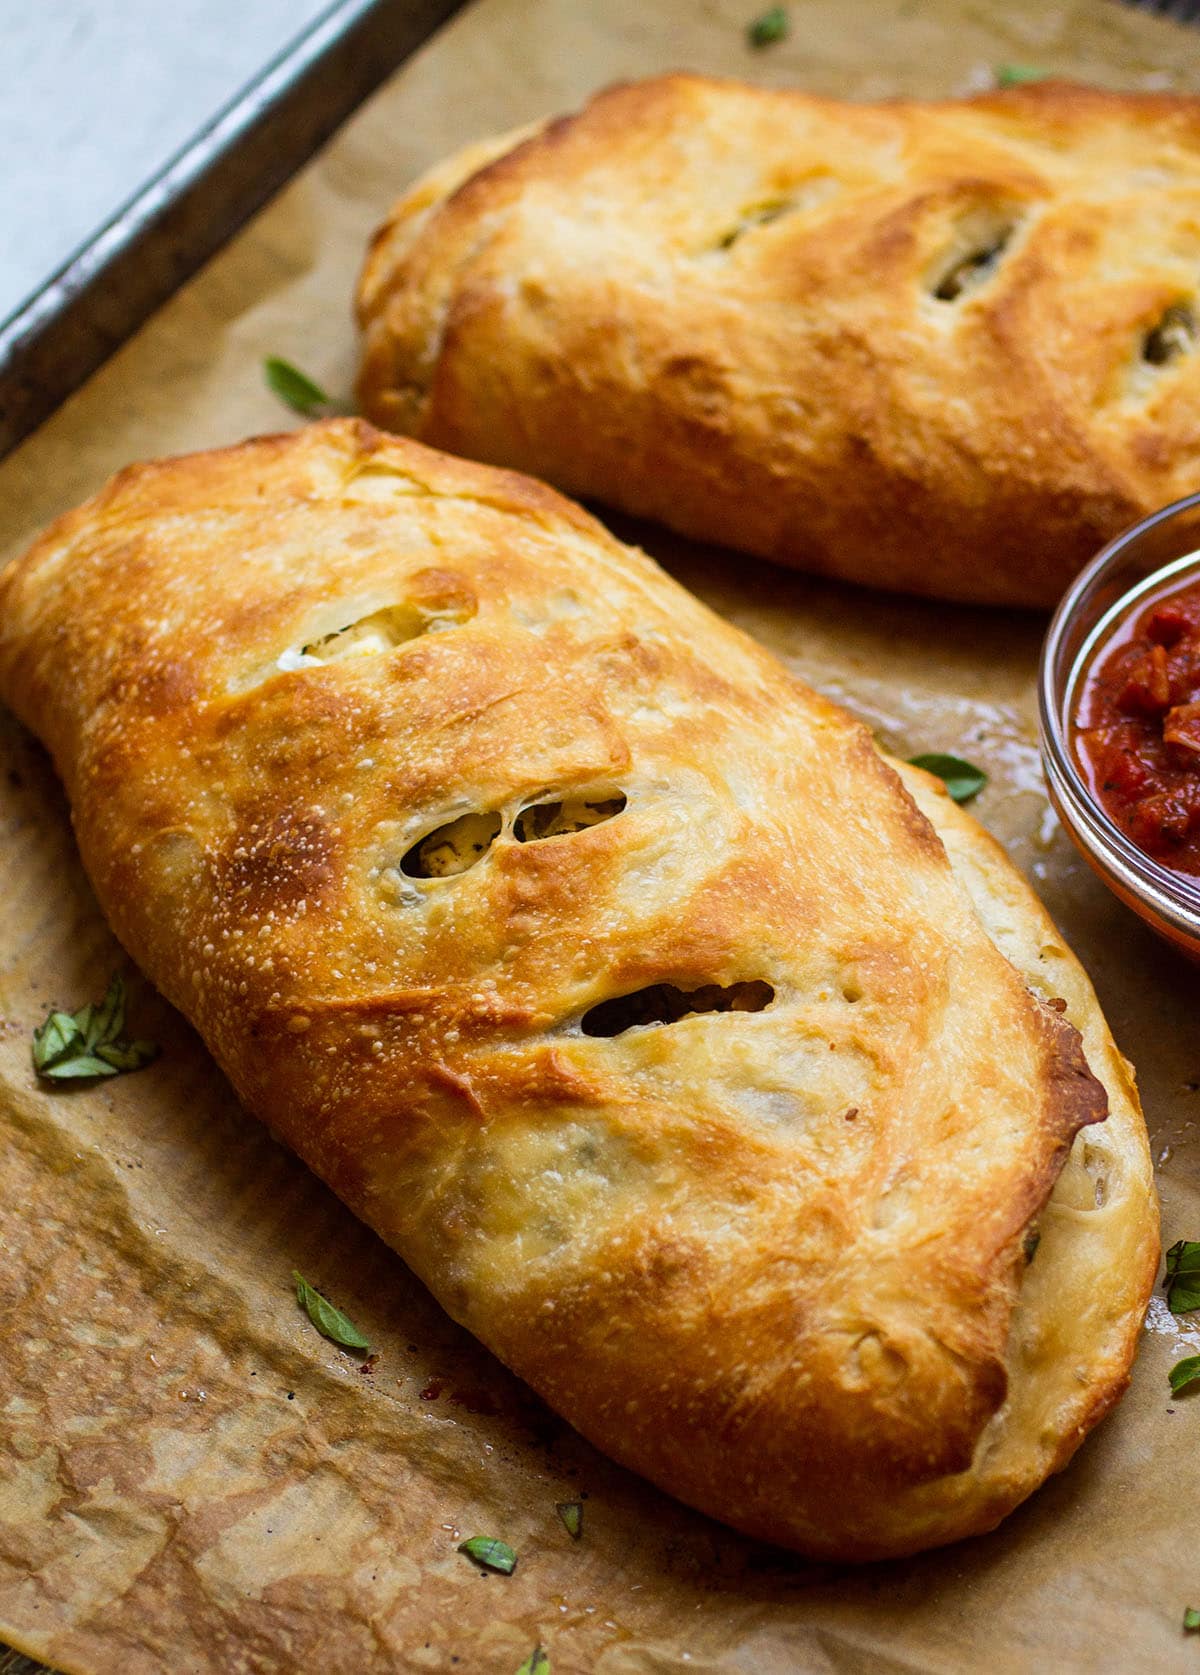 Baked calzone on a baking sheet lined with parchment paper.